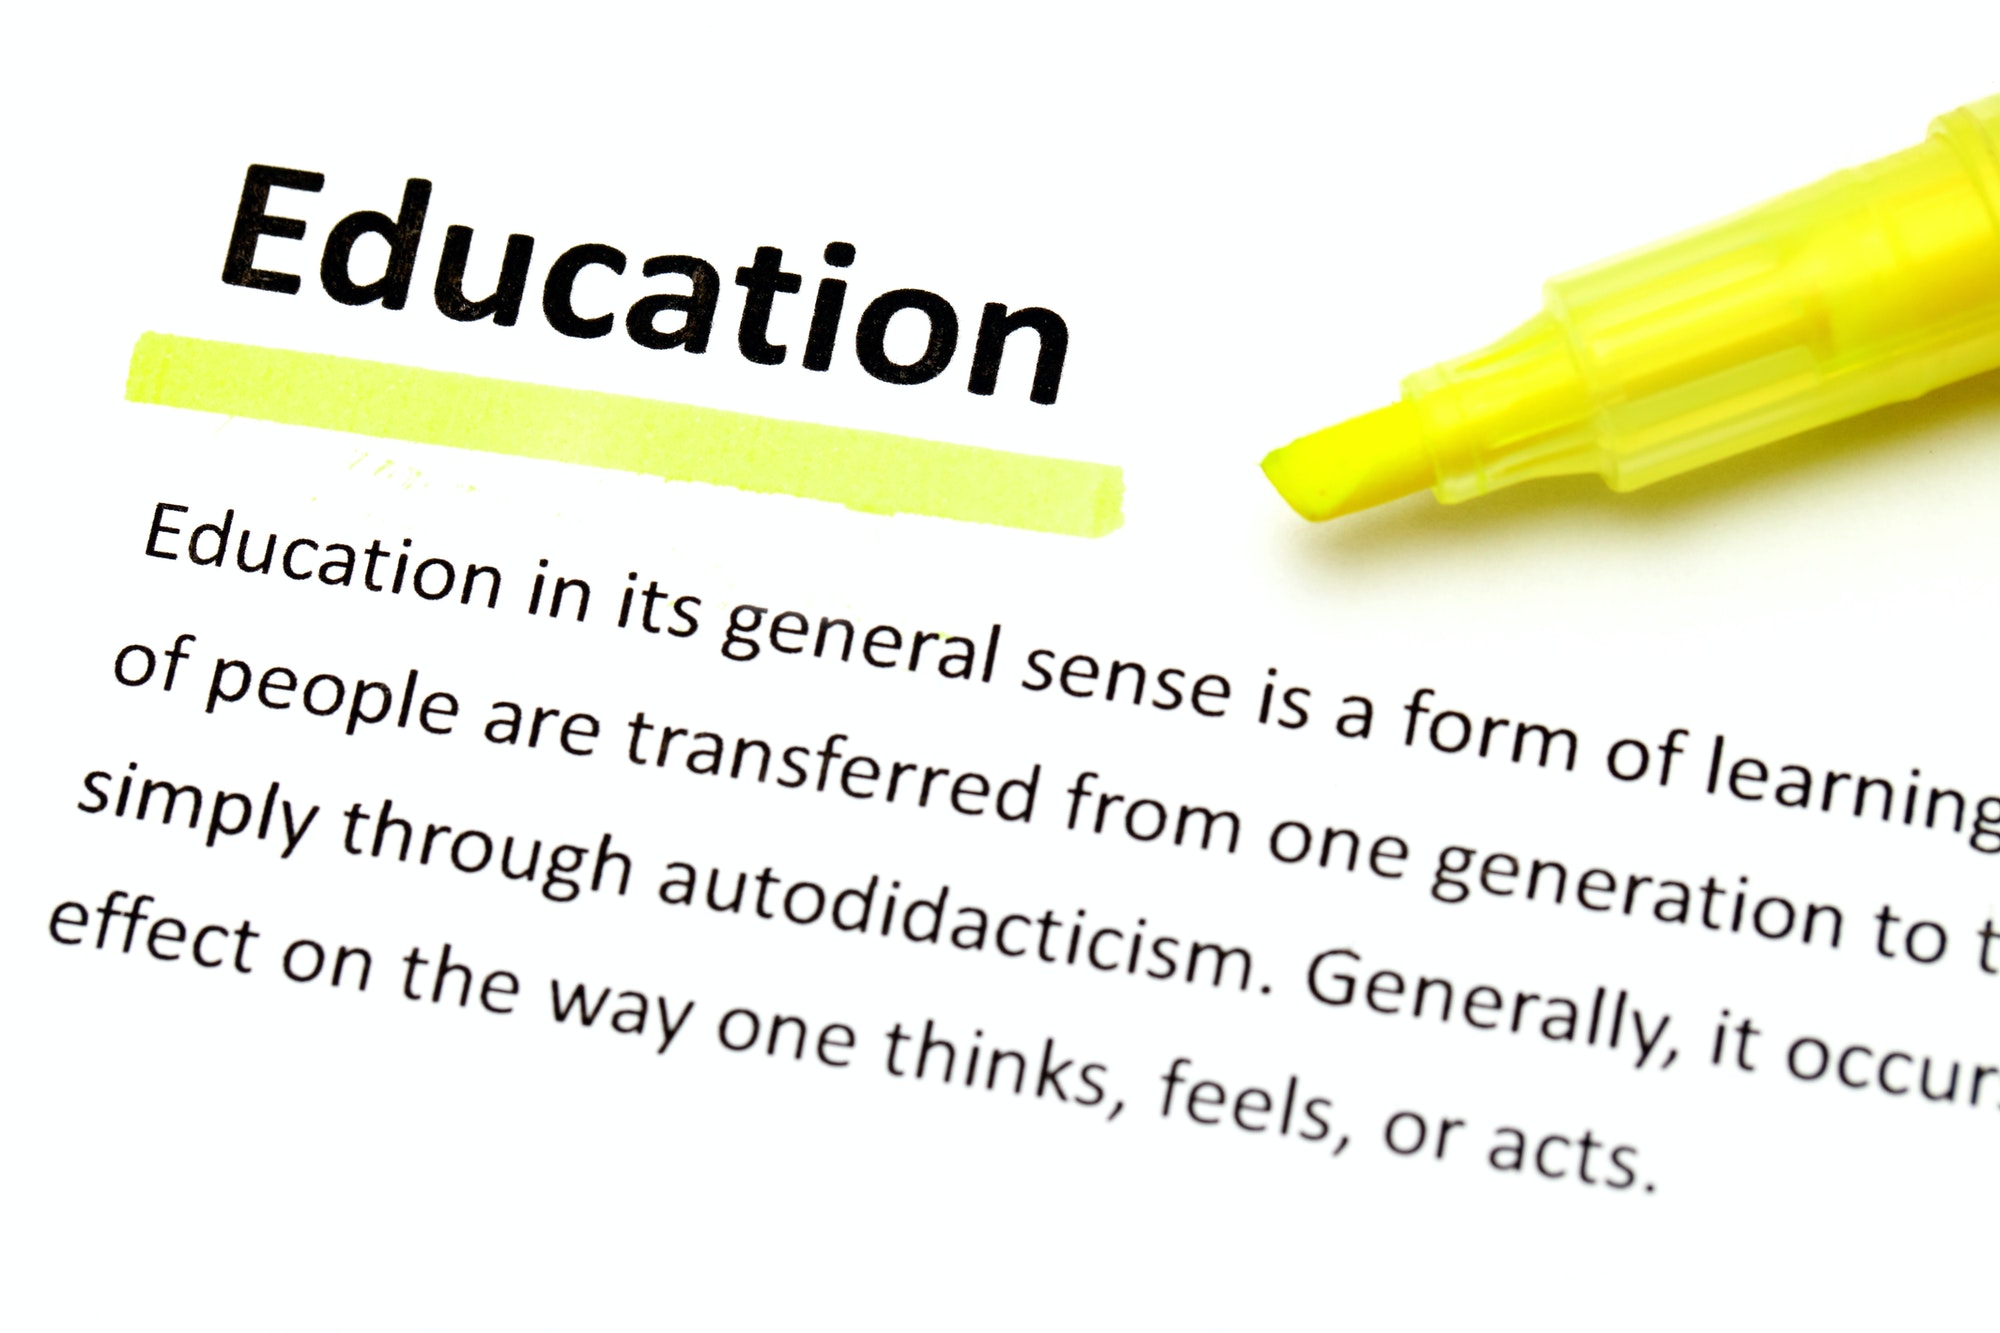 Definition of education